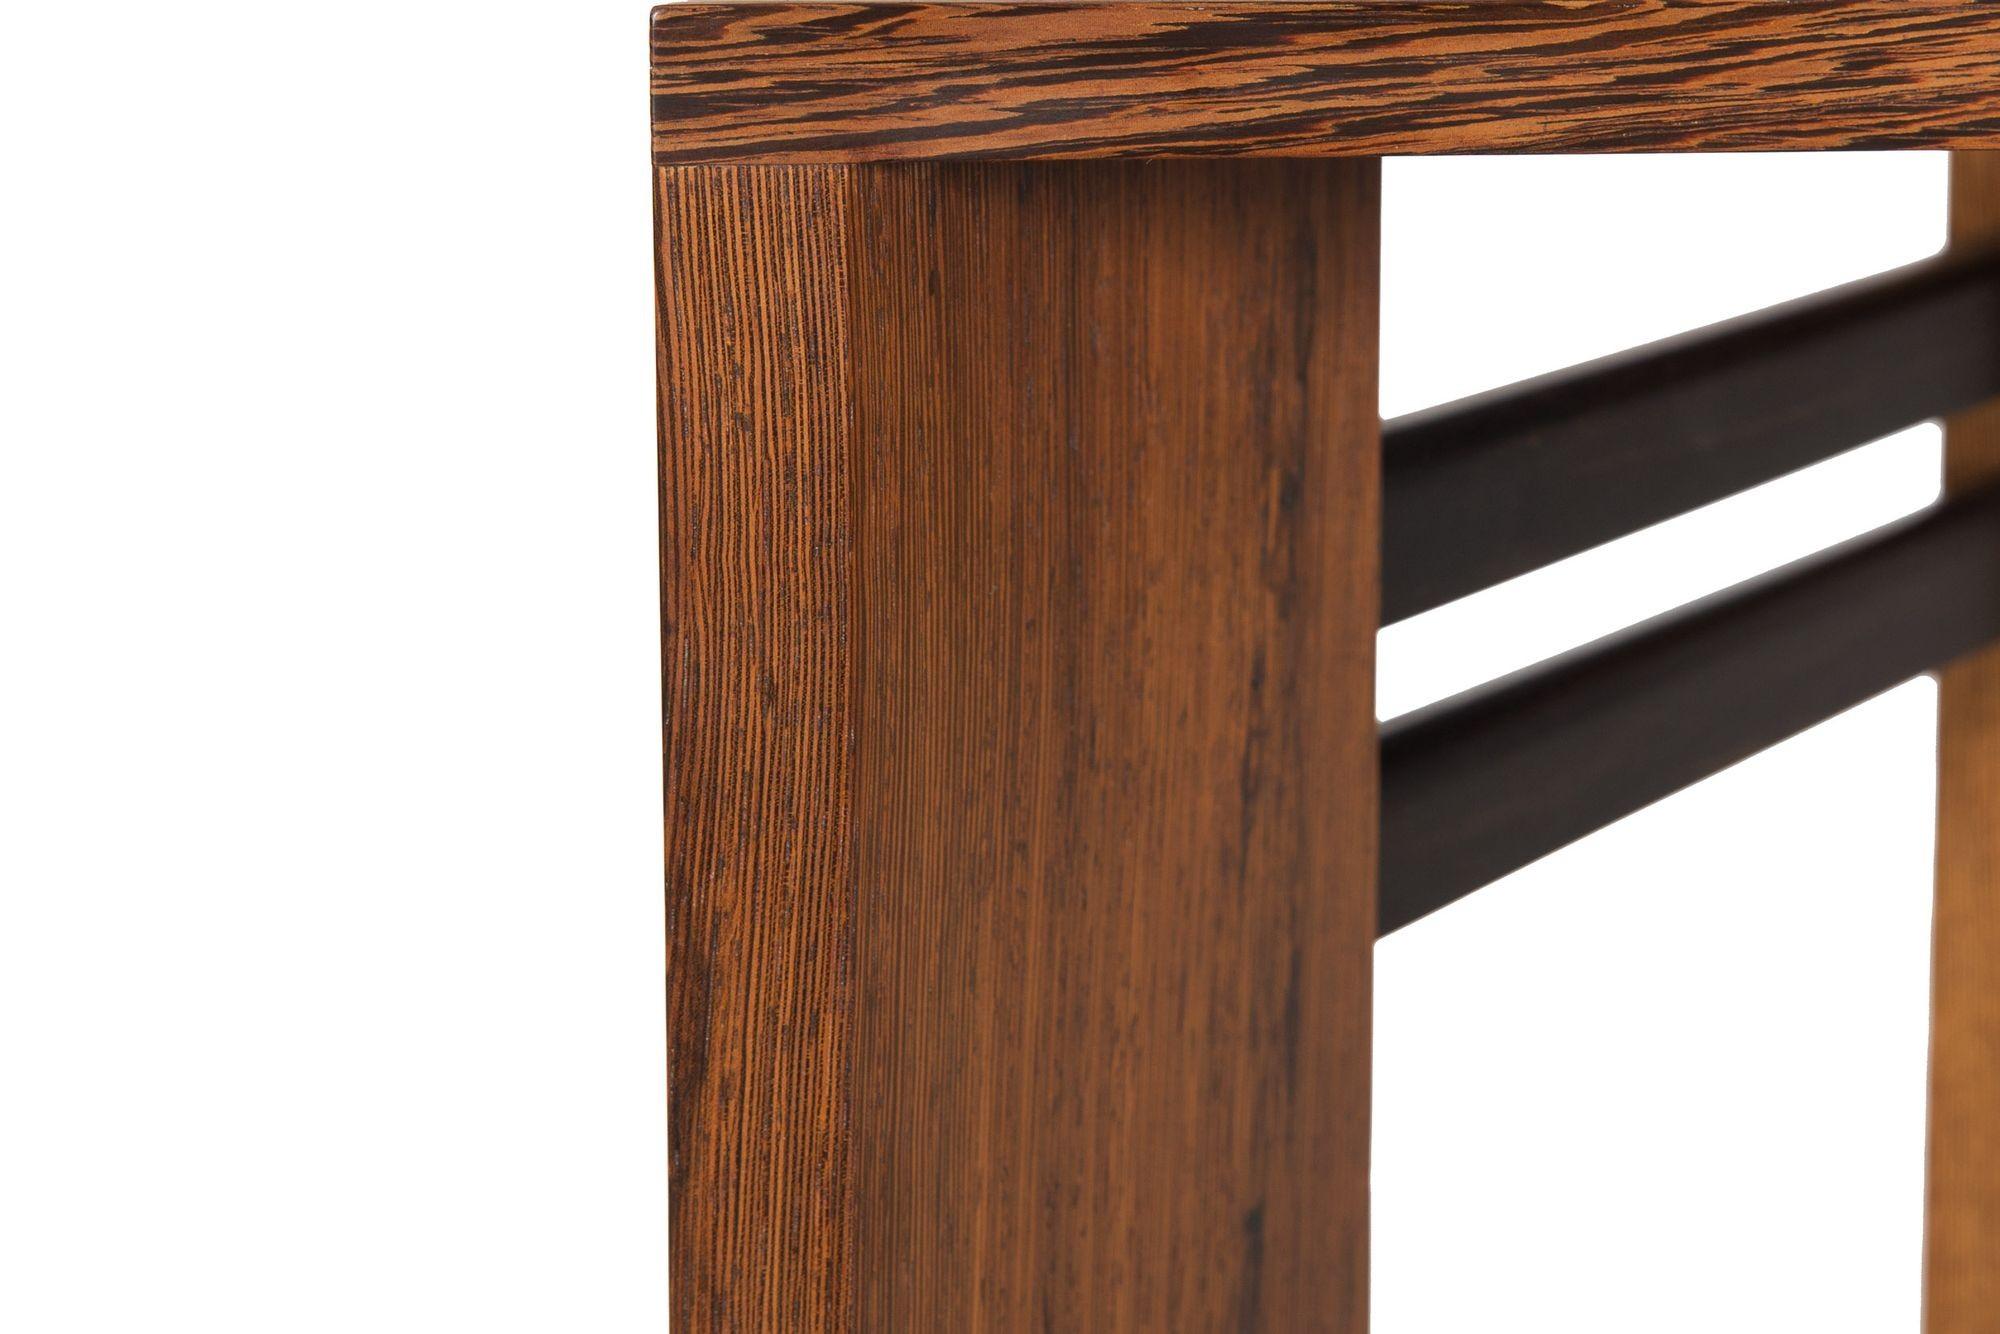 Post-Modern Ebony Hardwood Accent Table w/ Dovetailed Corners, circa 1987 For Sale 4